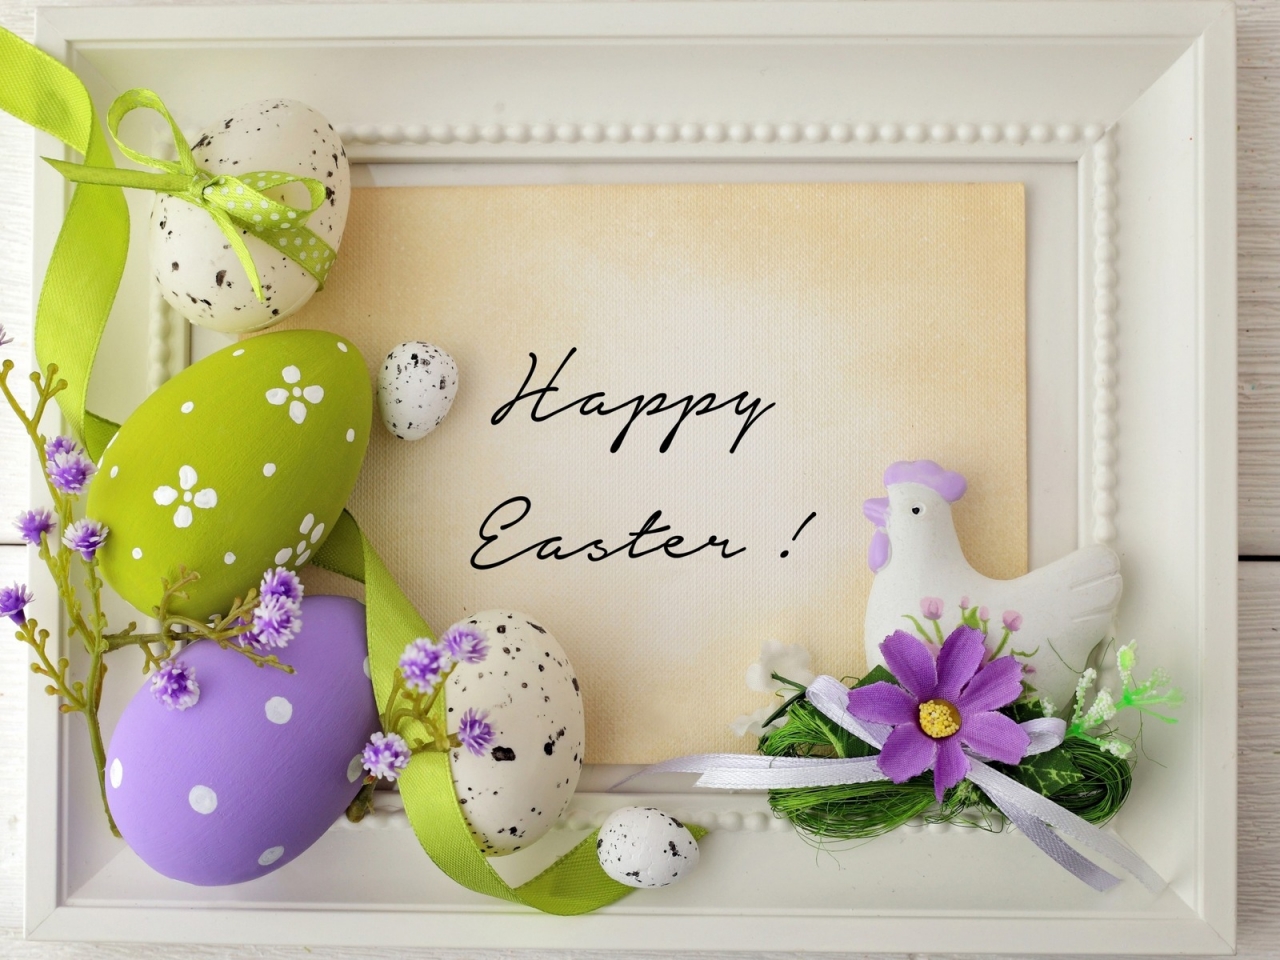 Happy Easter 2015 for 1280 x 960 resolution